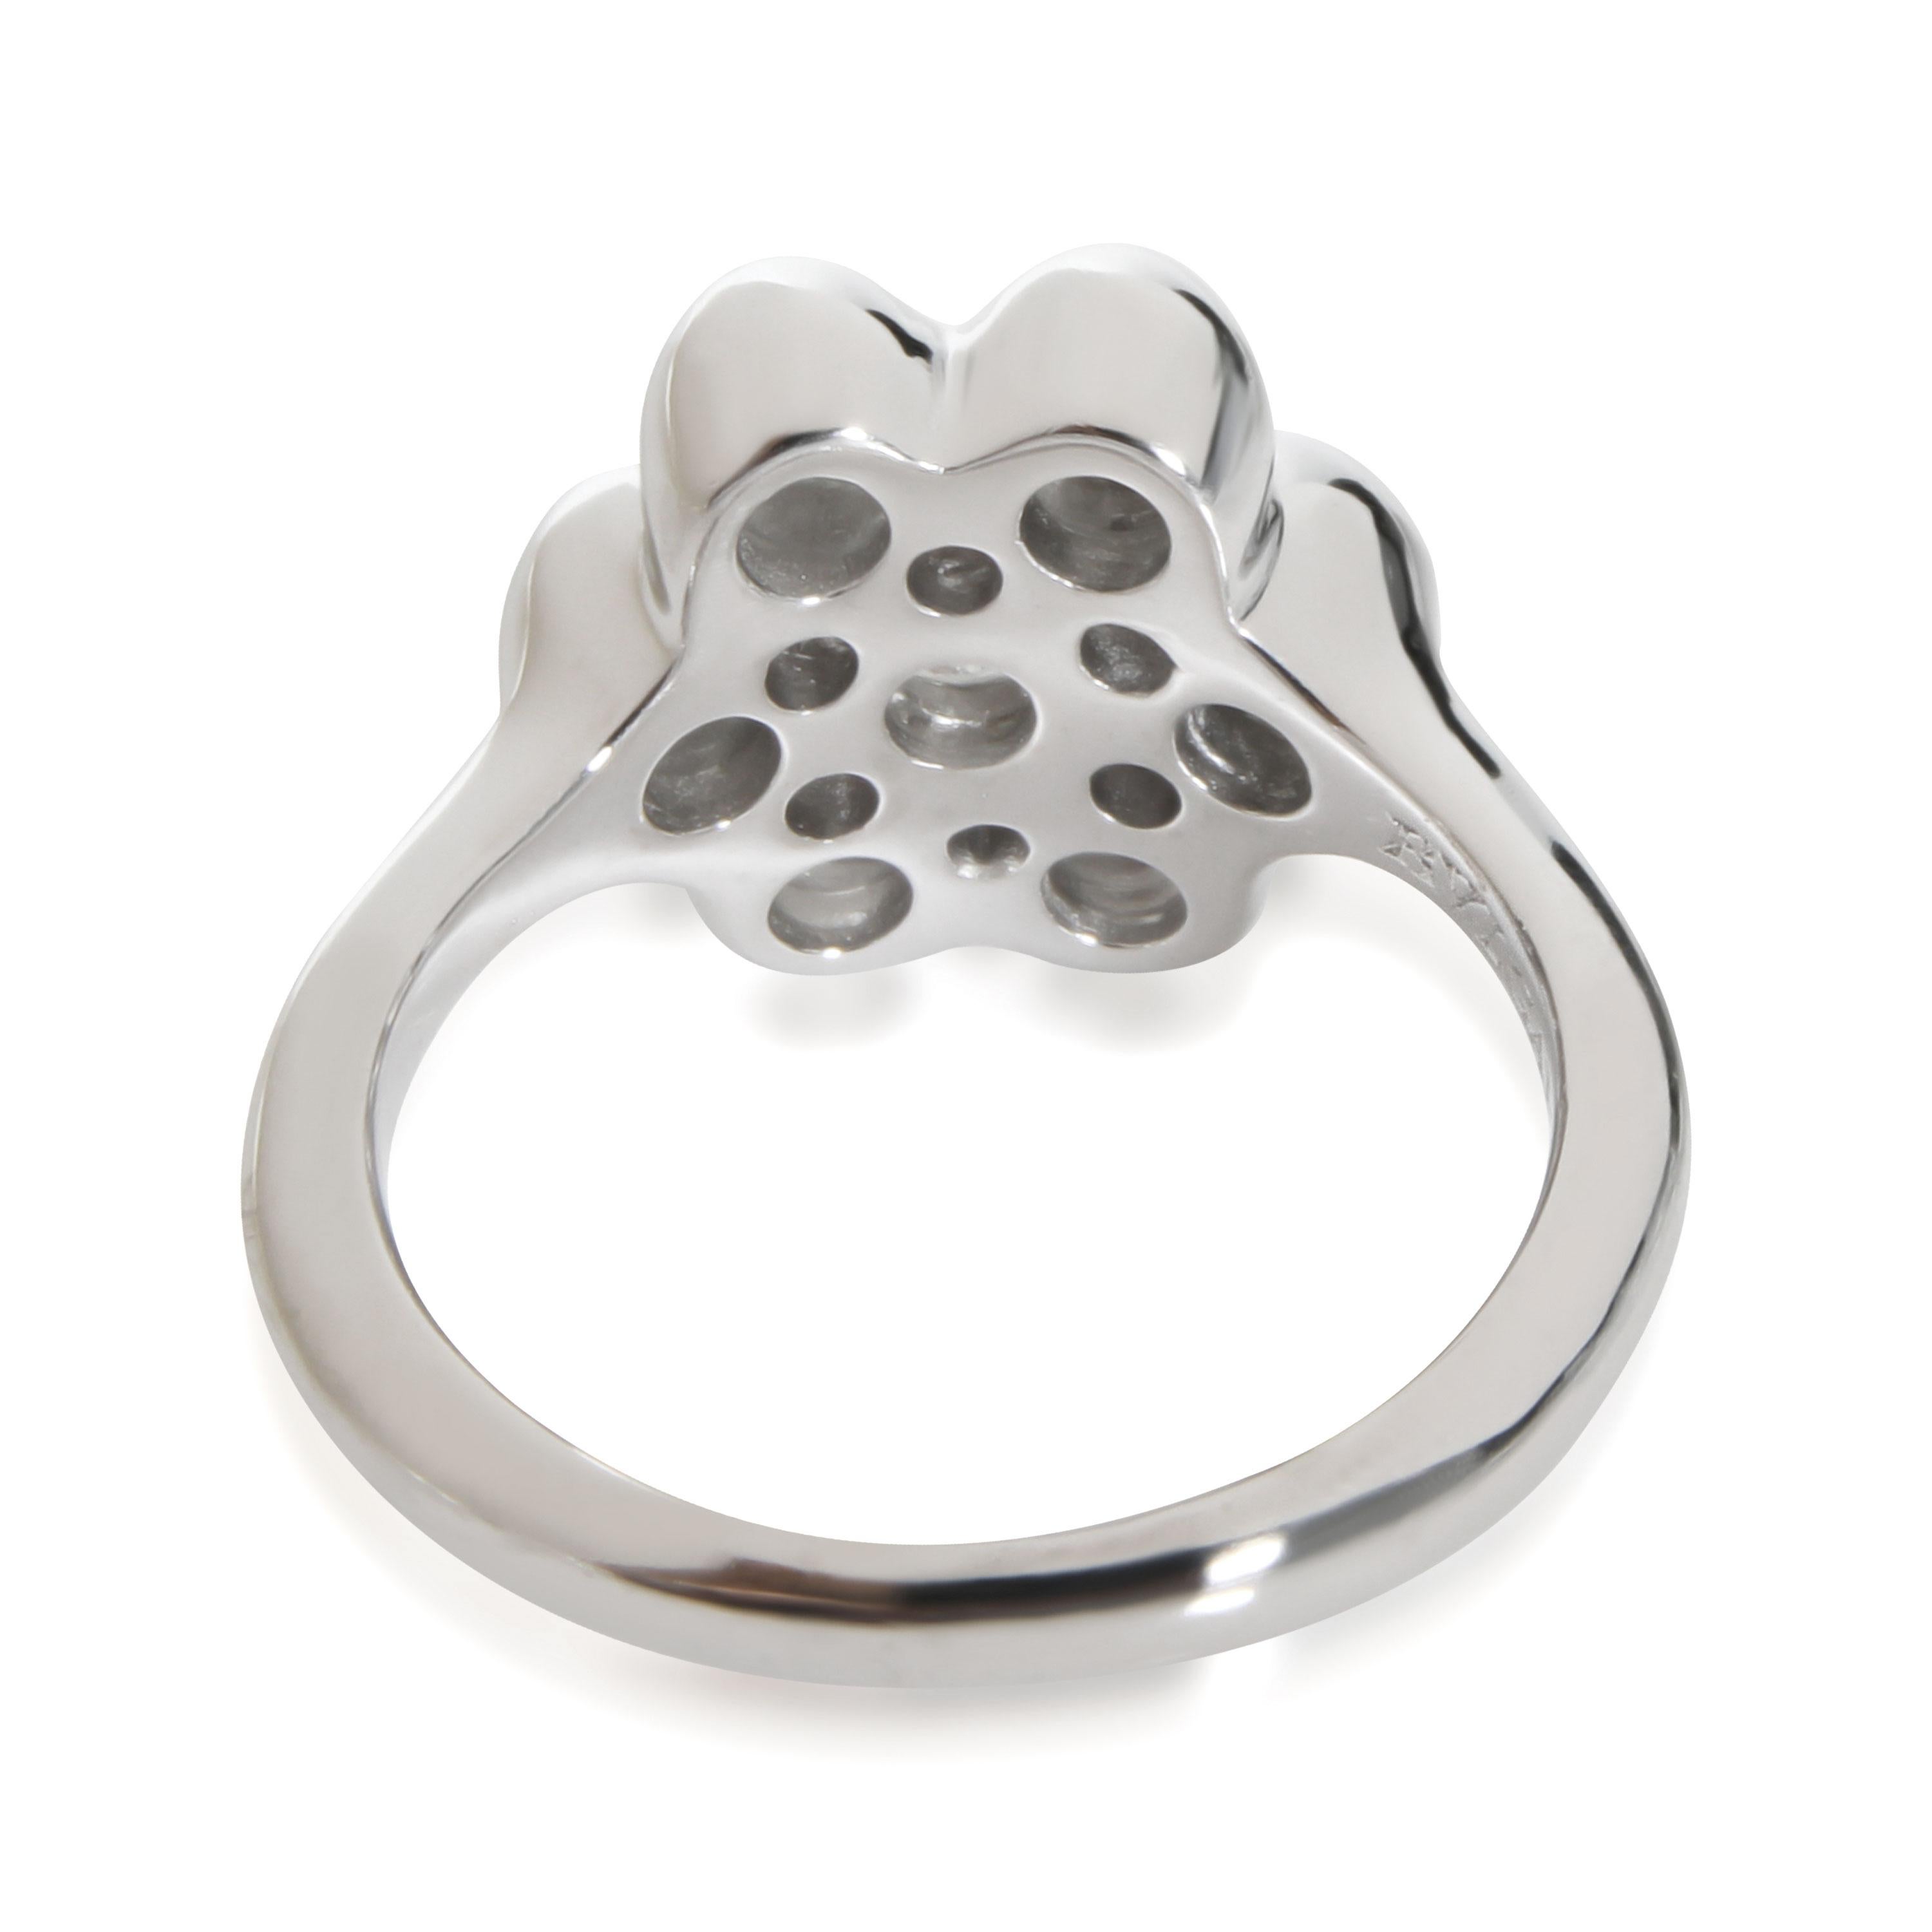 Bvlgari Diamond Flower Shaped Cluster Ring in Platinum 1 CTW

PRIMARY DETAILS
SKU: 111574
Listing Title: Bvlgari Diamond Flower Shaped Cluster Ring in Platinum 1 CTW
Condition Description: Retails for 8,000 USD. In excellent condition and recently